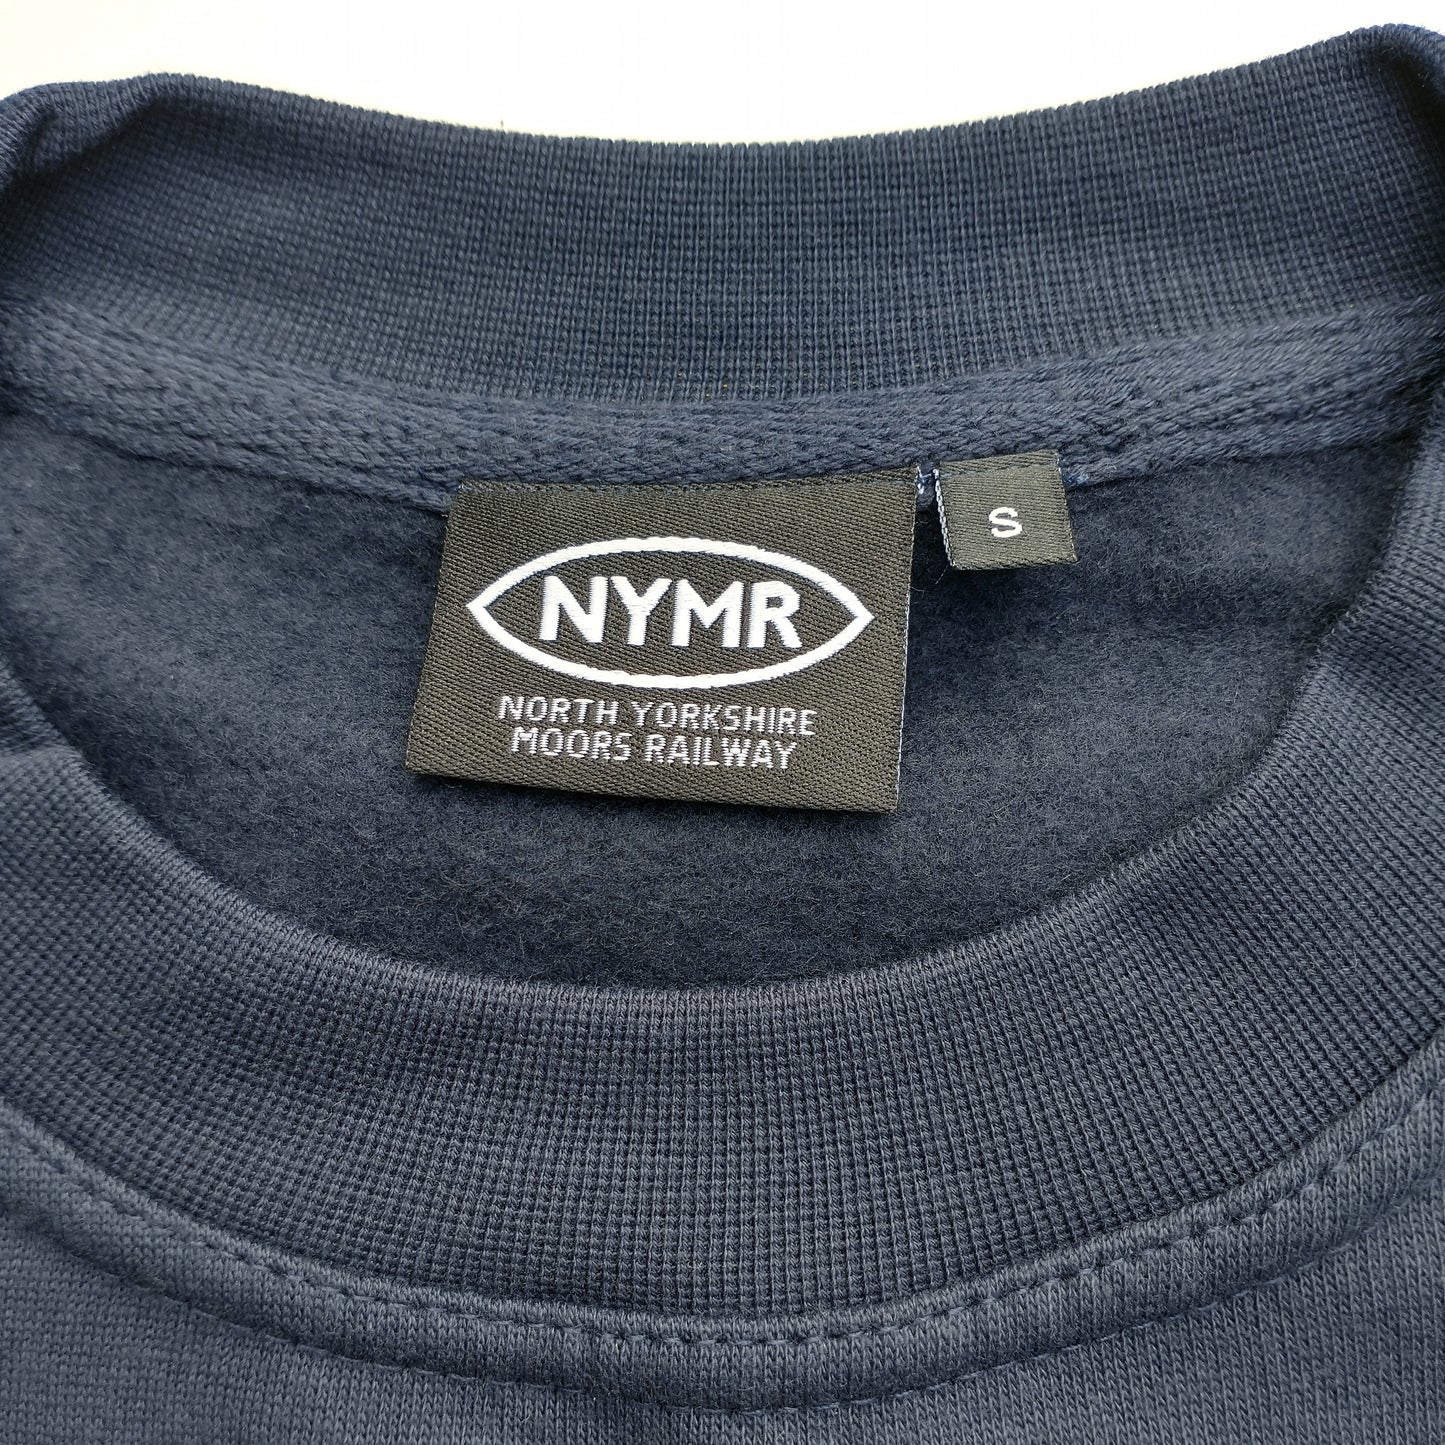 Close up of neck of sweatshirt with NYMR label